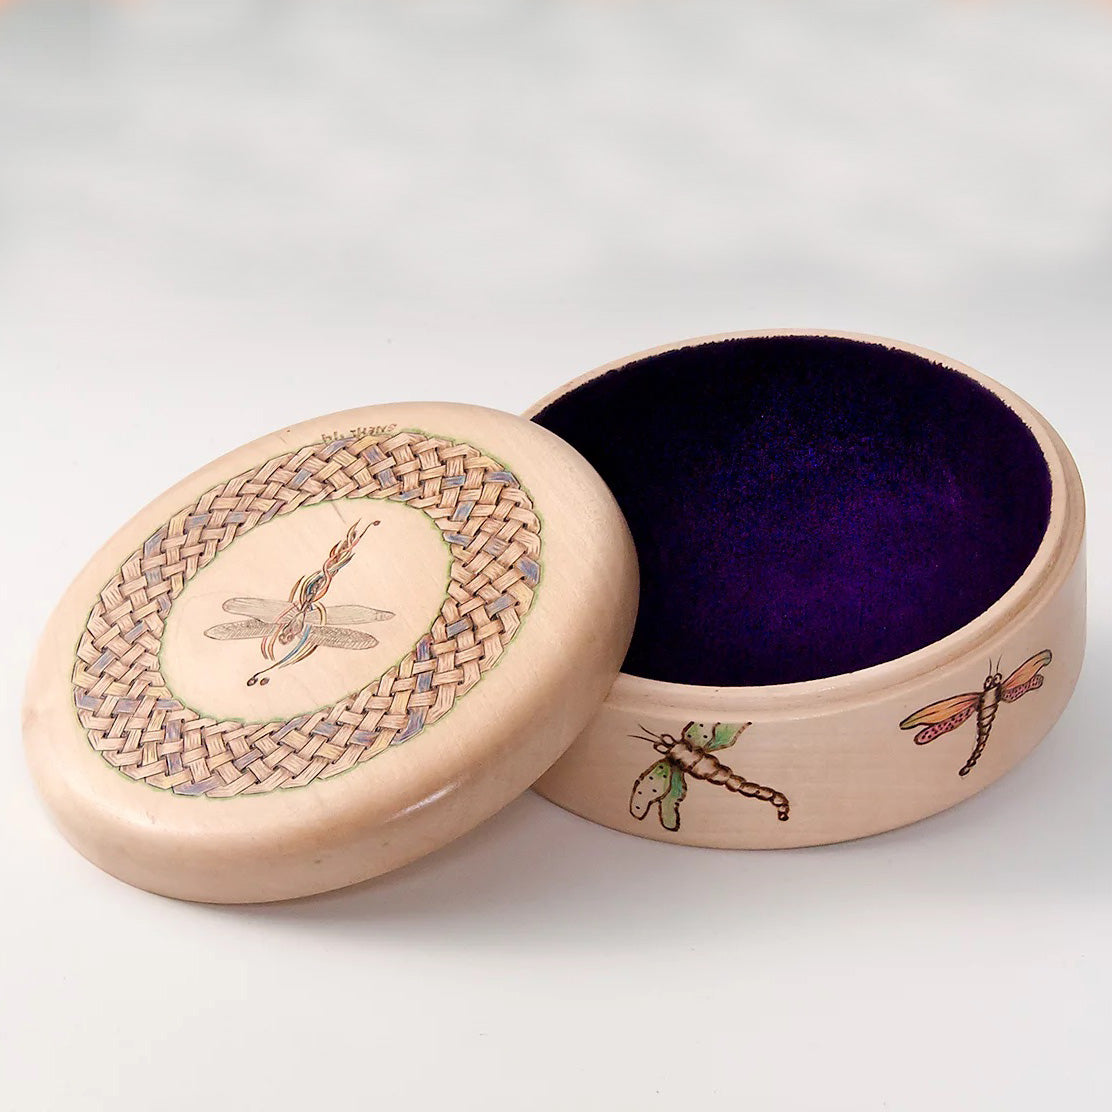 A round, lidded box with a felt bottom. The box is adorned with woodburned and hand-painted dragonflies. 